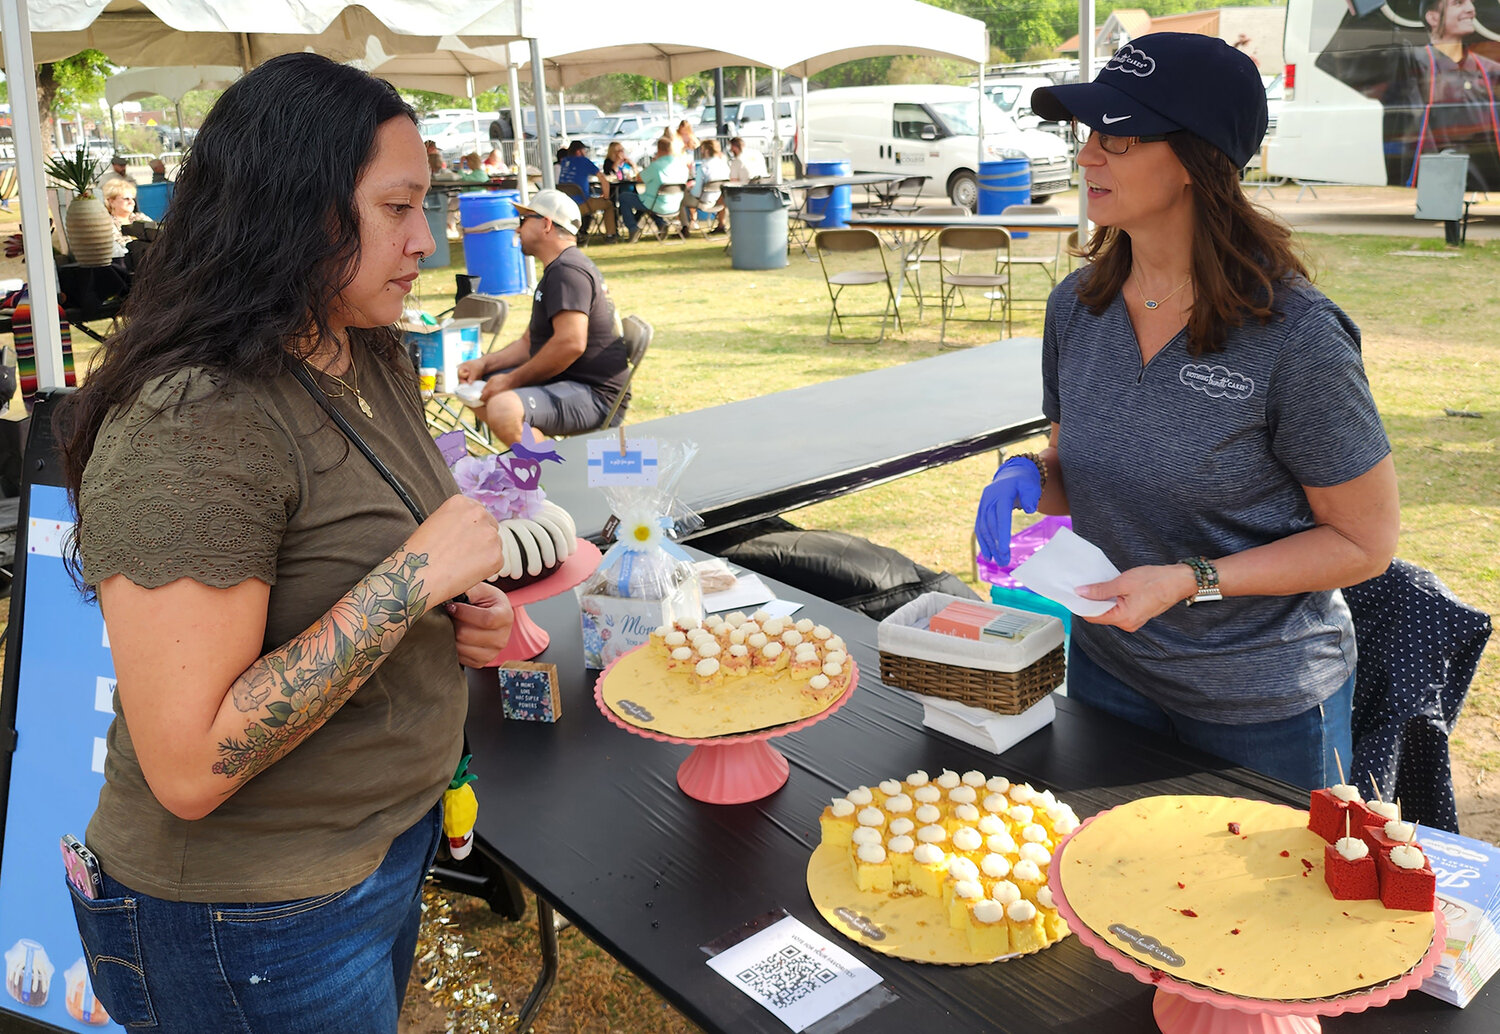 Cynthia Perez (l) takes a cake from Monica Valdez at the Nothing Bundt Cakes booth.